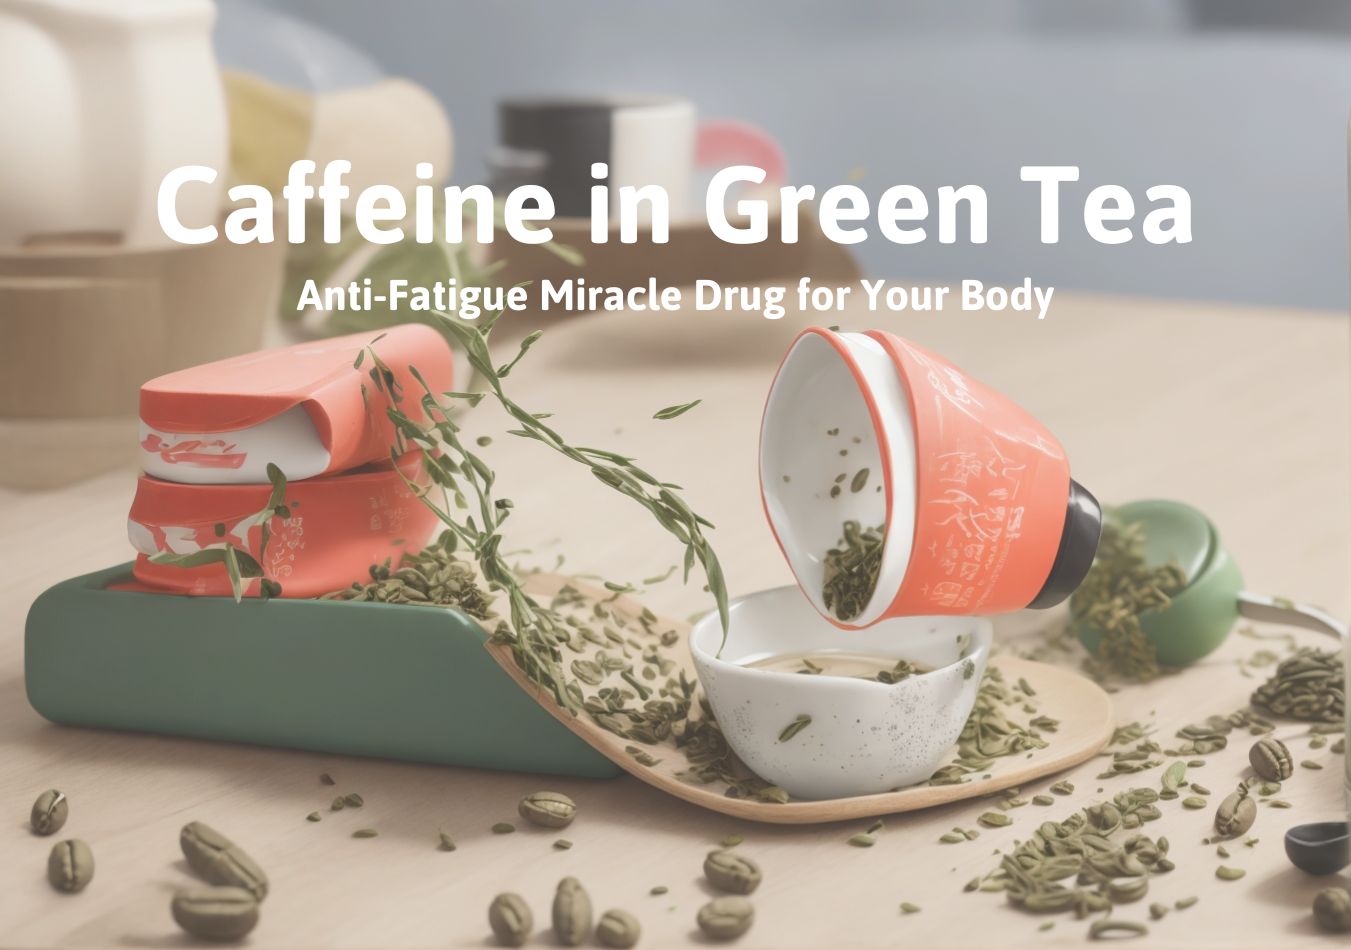 Caffeine in Green Tea Anti-Fatigue Miracle Drug for Your Body